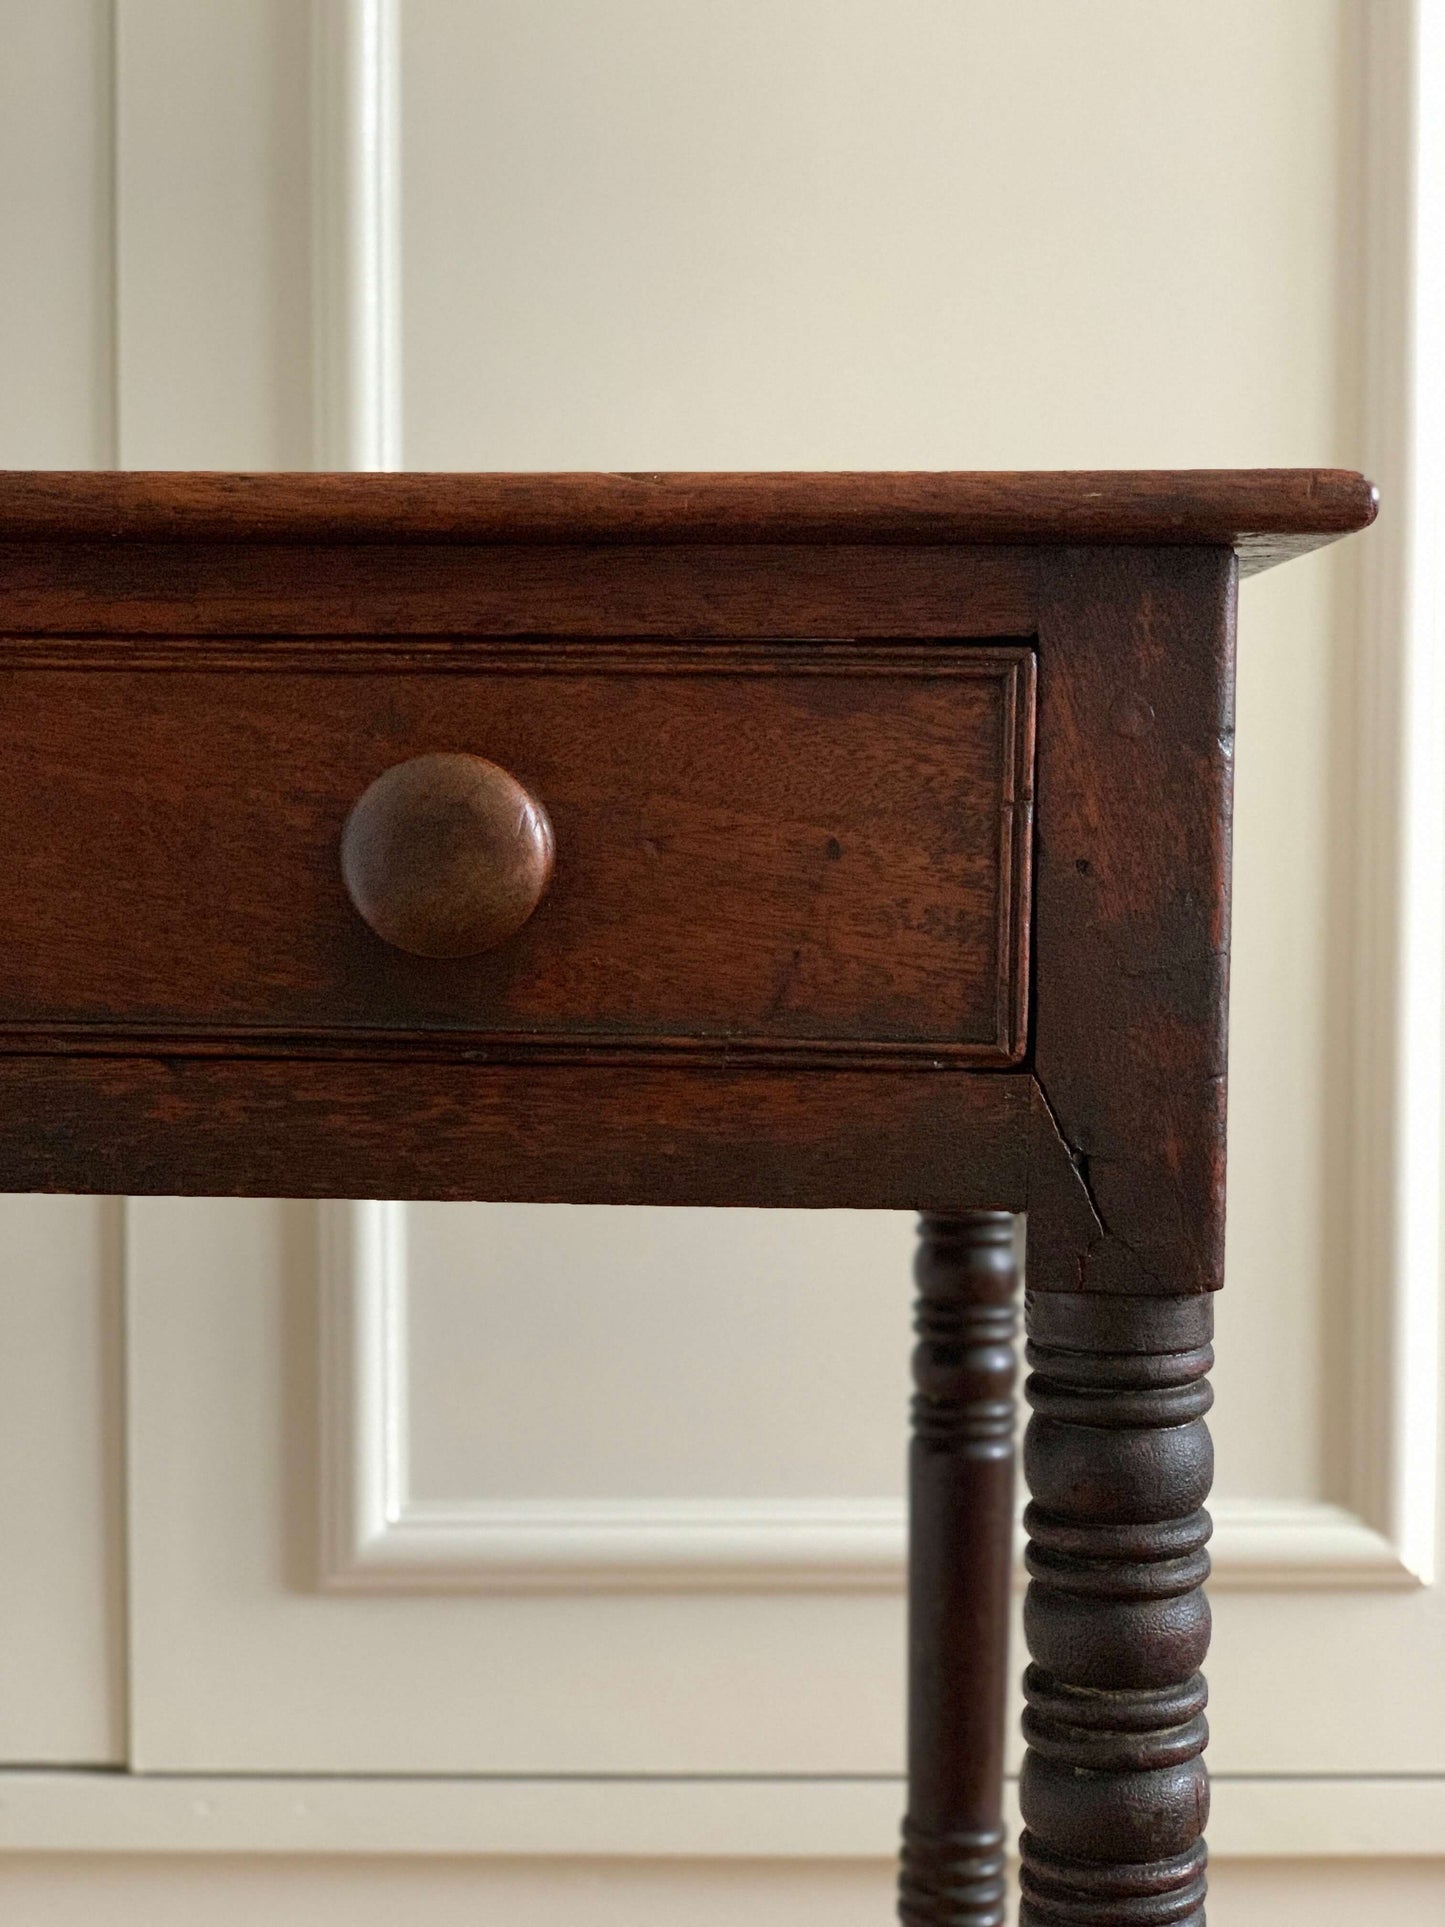 Antique console table with drawer